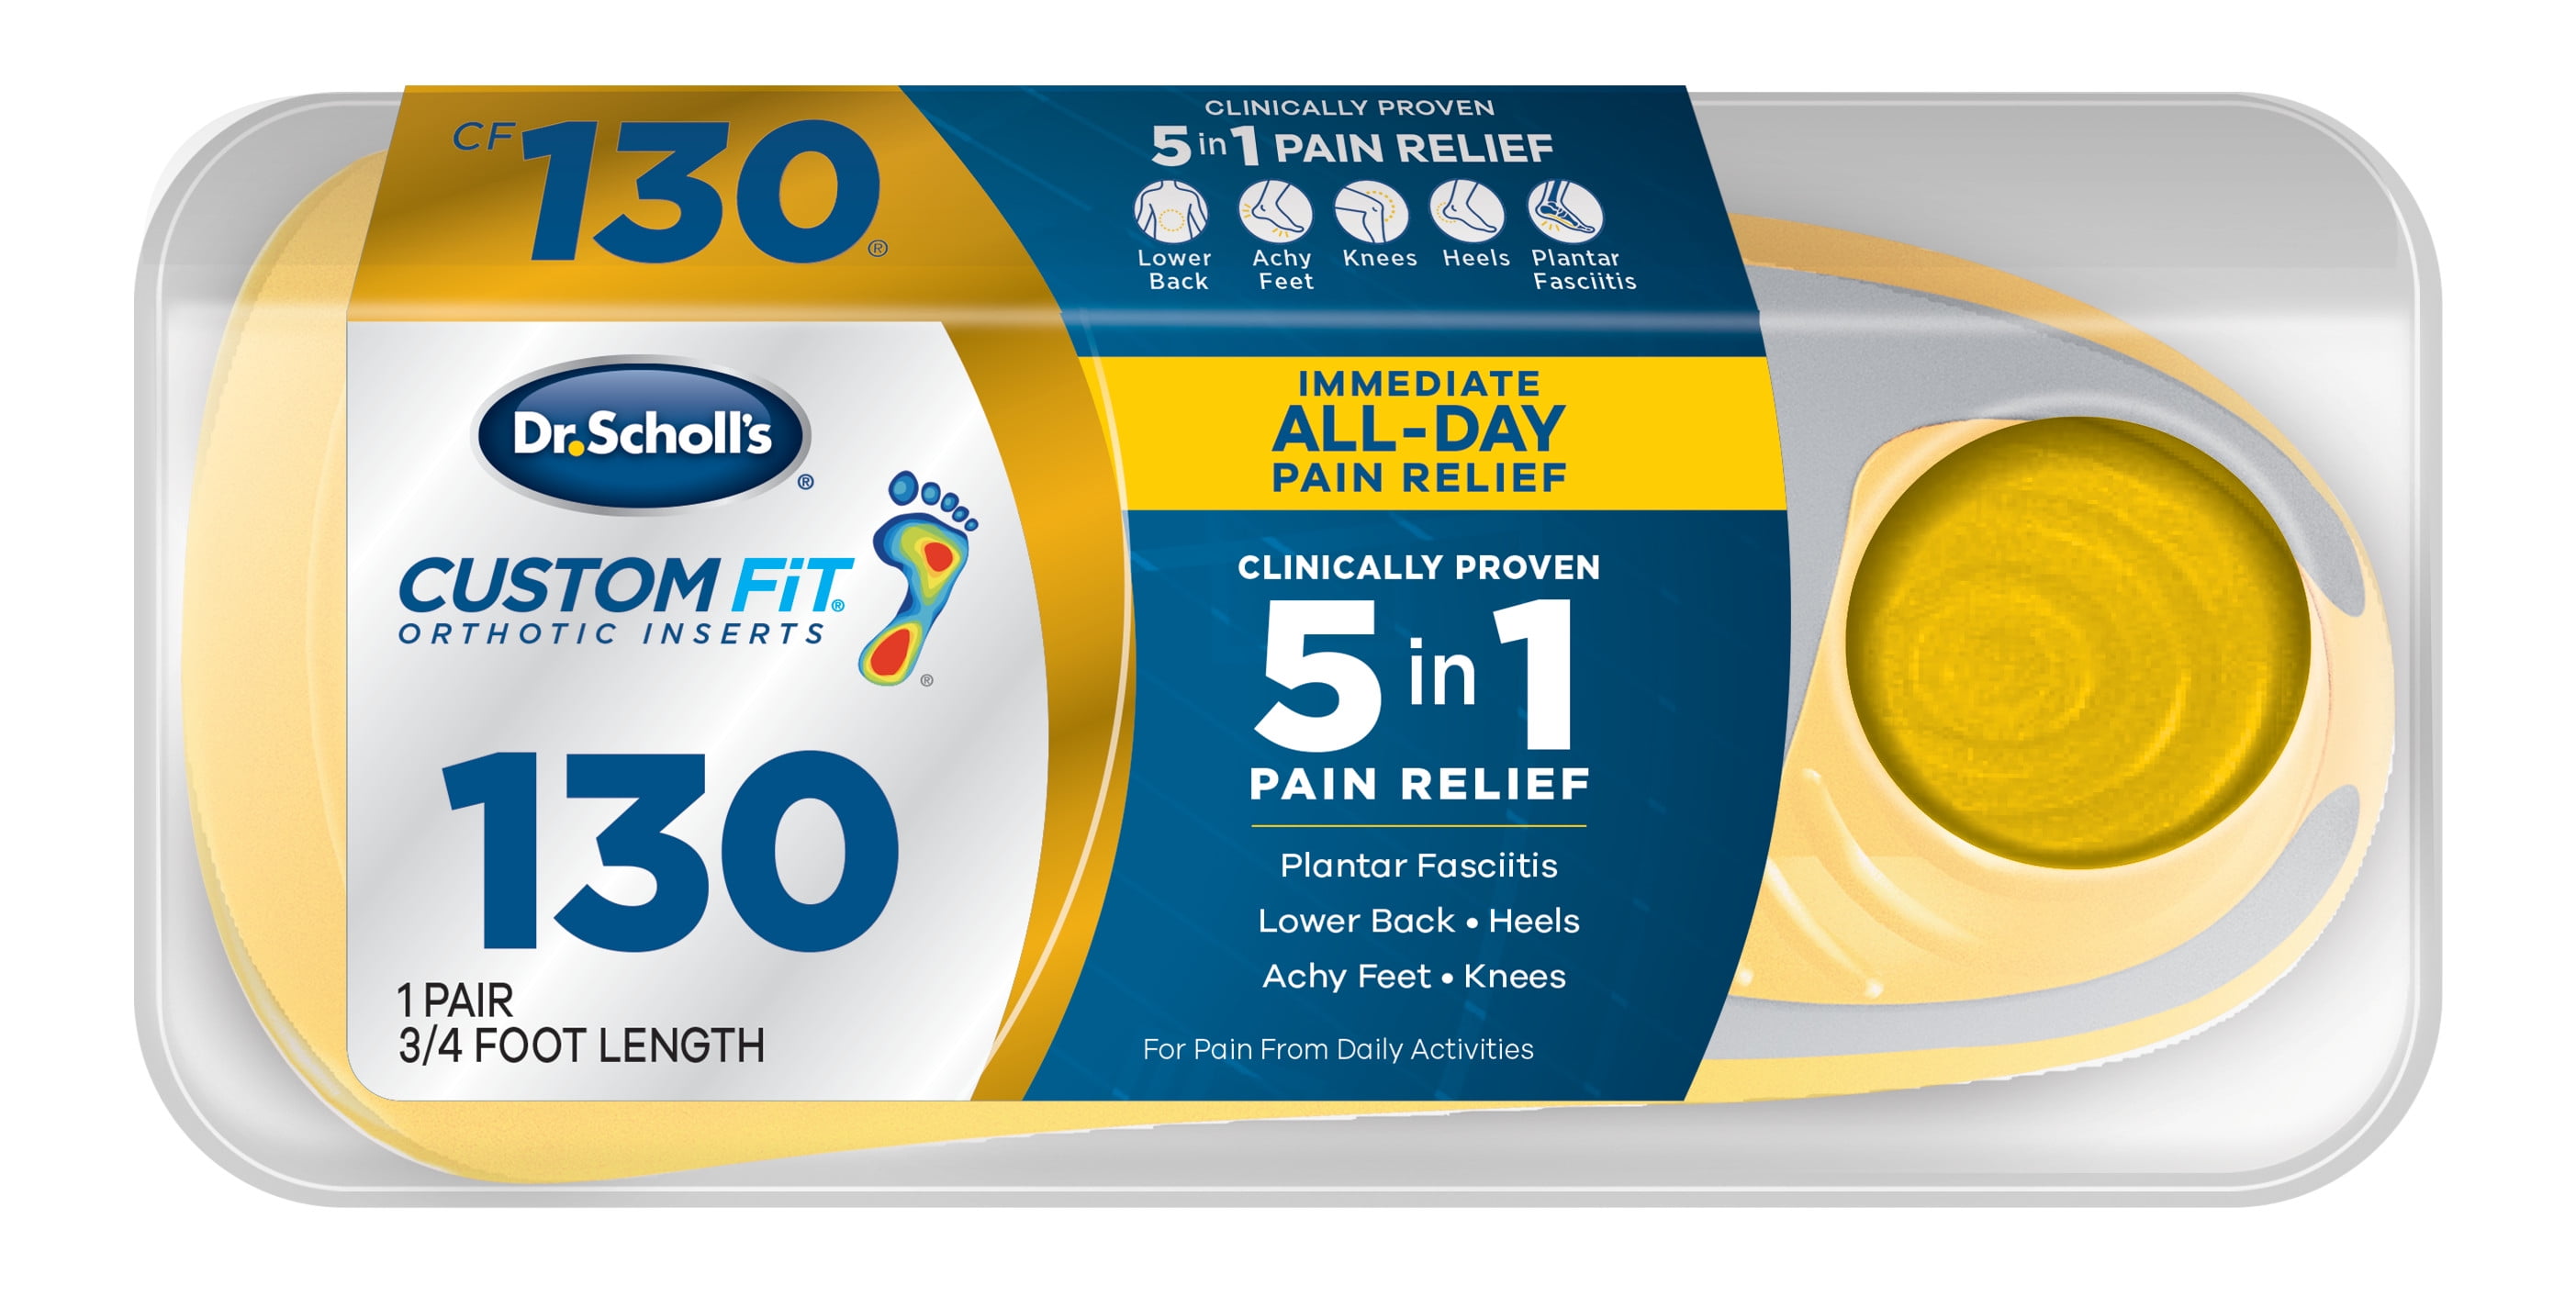 Dr Scholls Custom Fit CF 130 Orthotic Insole Shoe Inserts for Foot Knee and Lower Back Relief 1 Pair